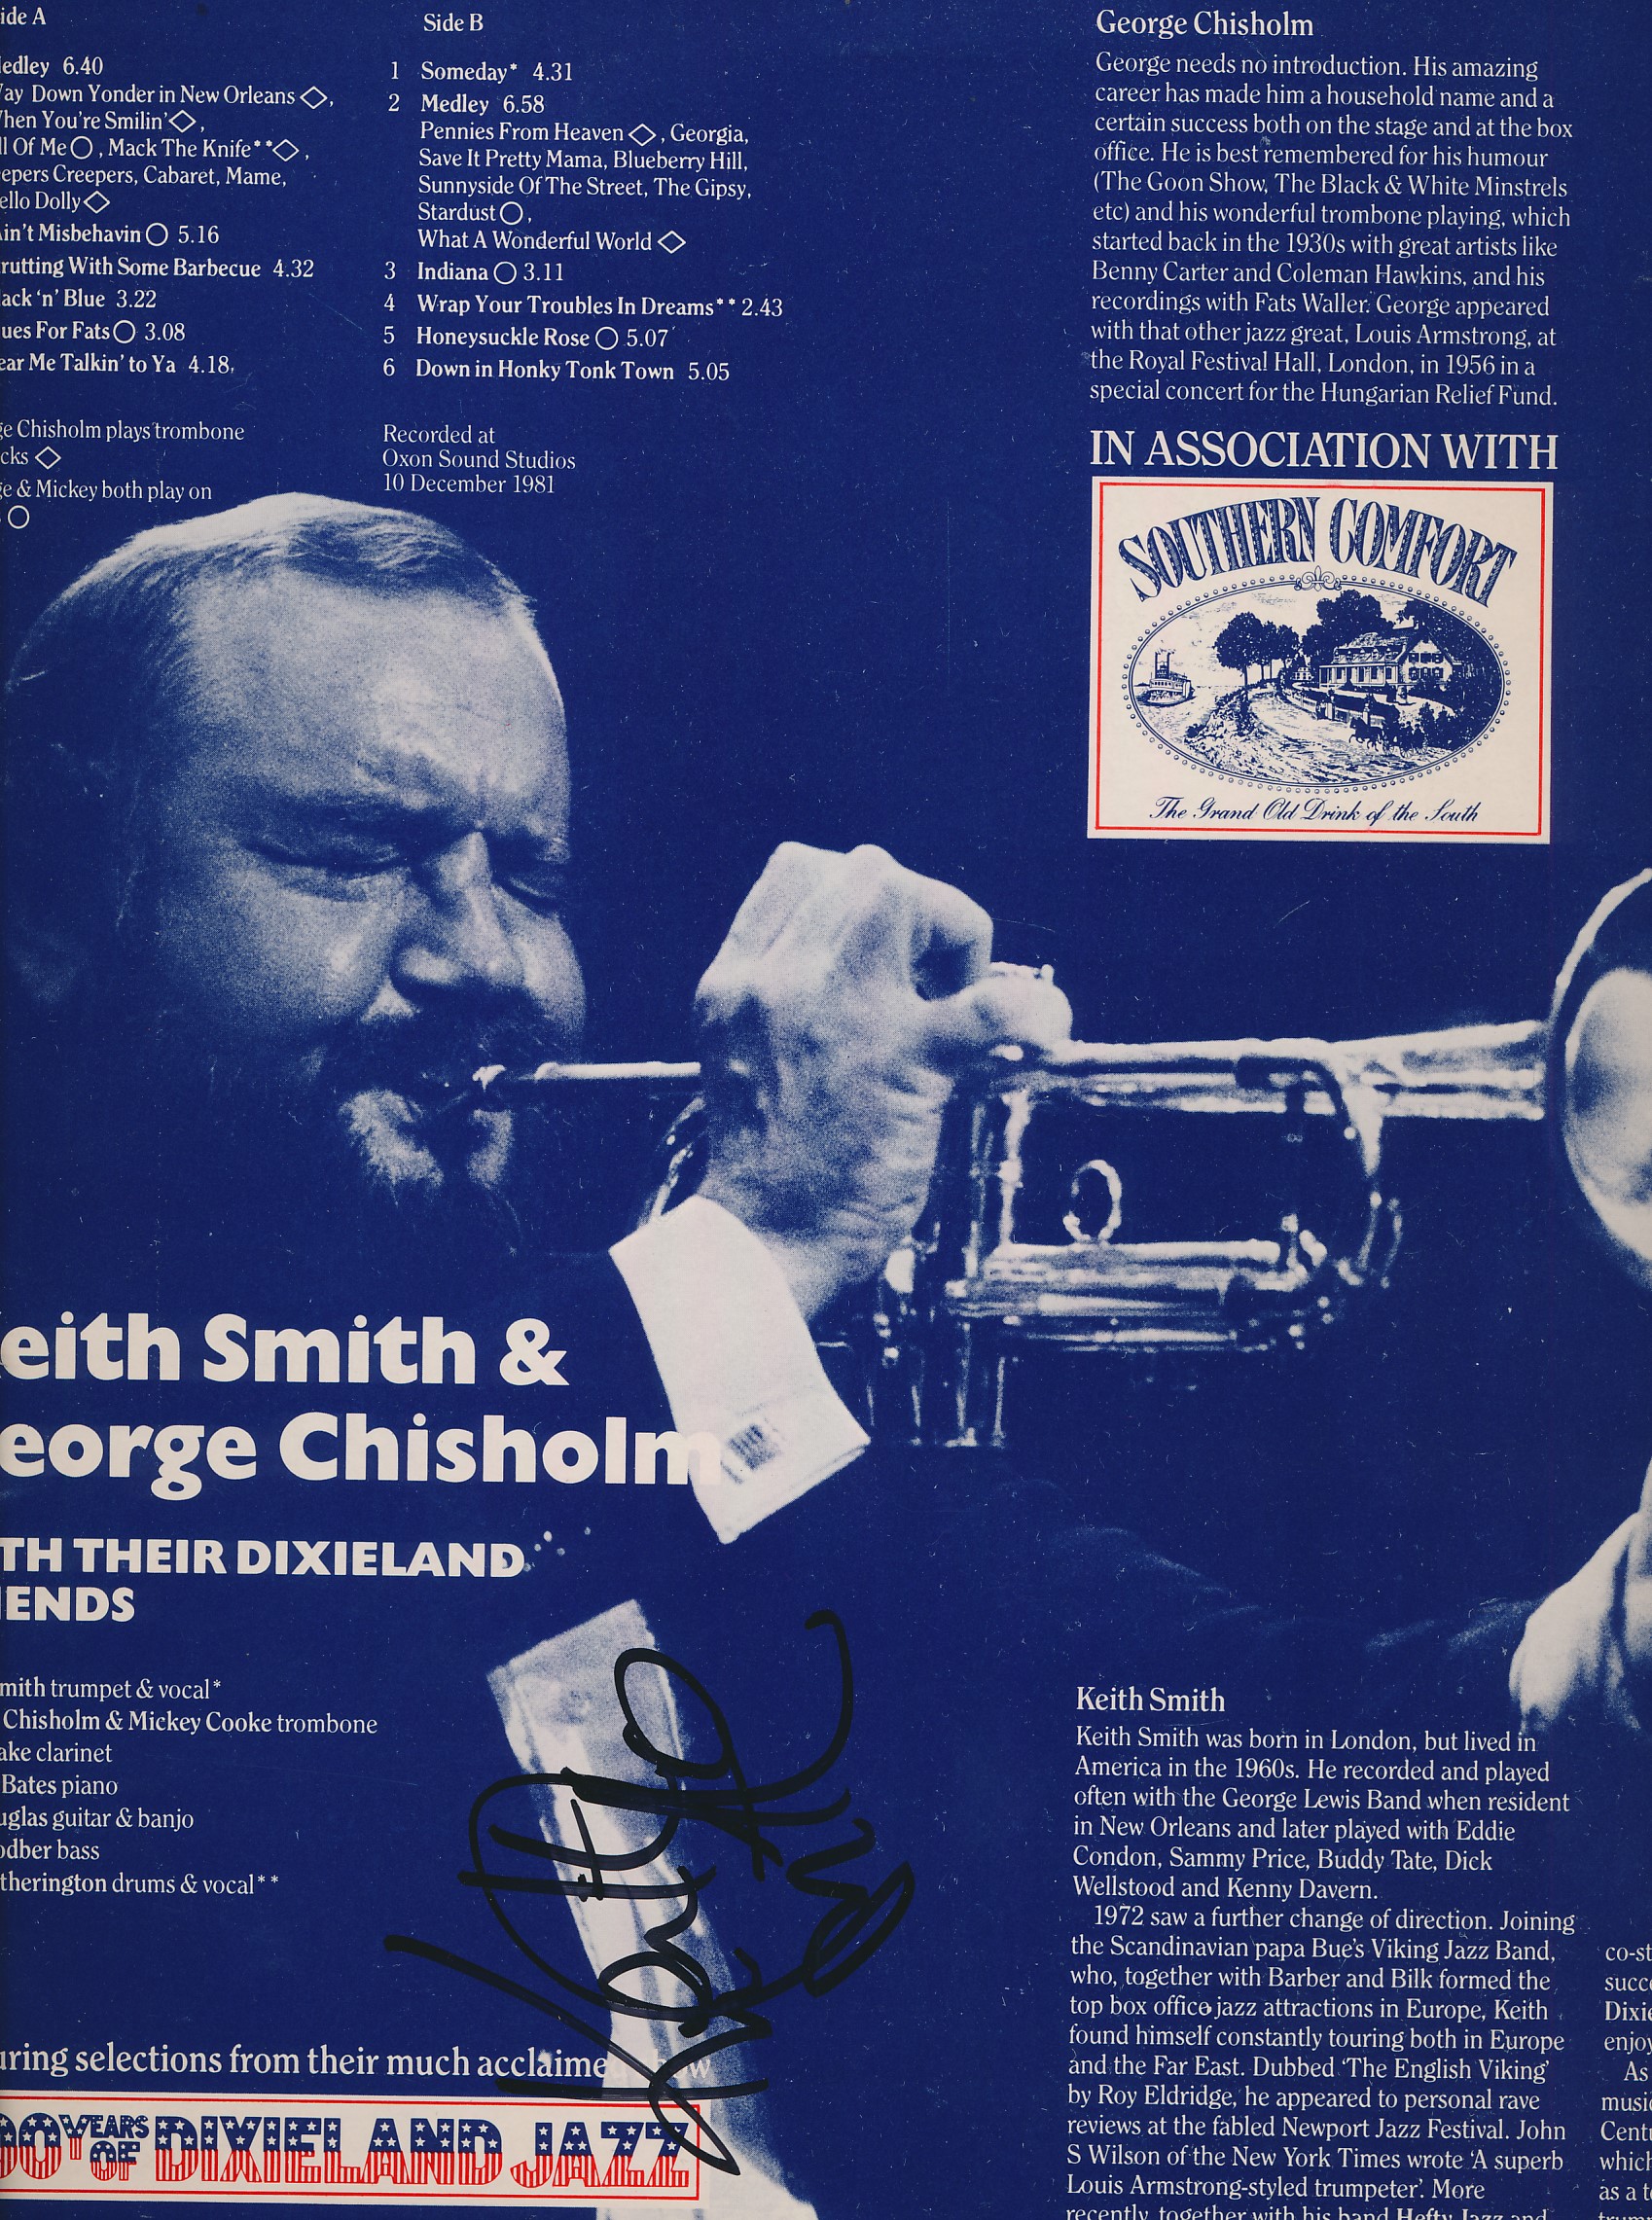 George Chisholm and Keith Smith with their Dixieland Friends. Signed Album. [HJ-107/585]